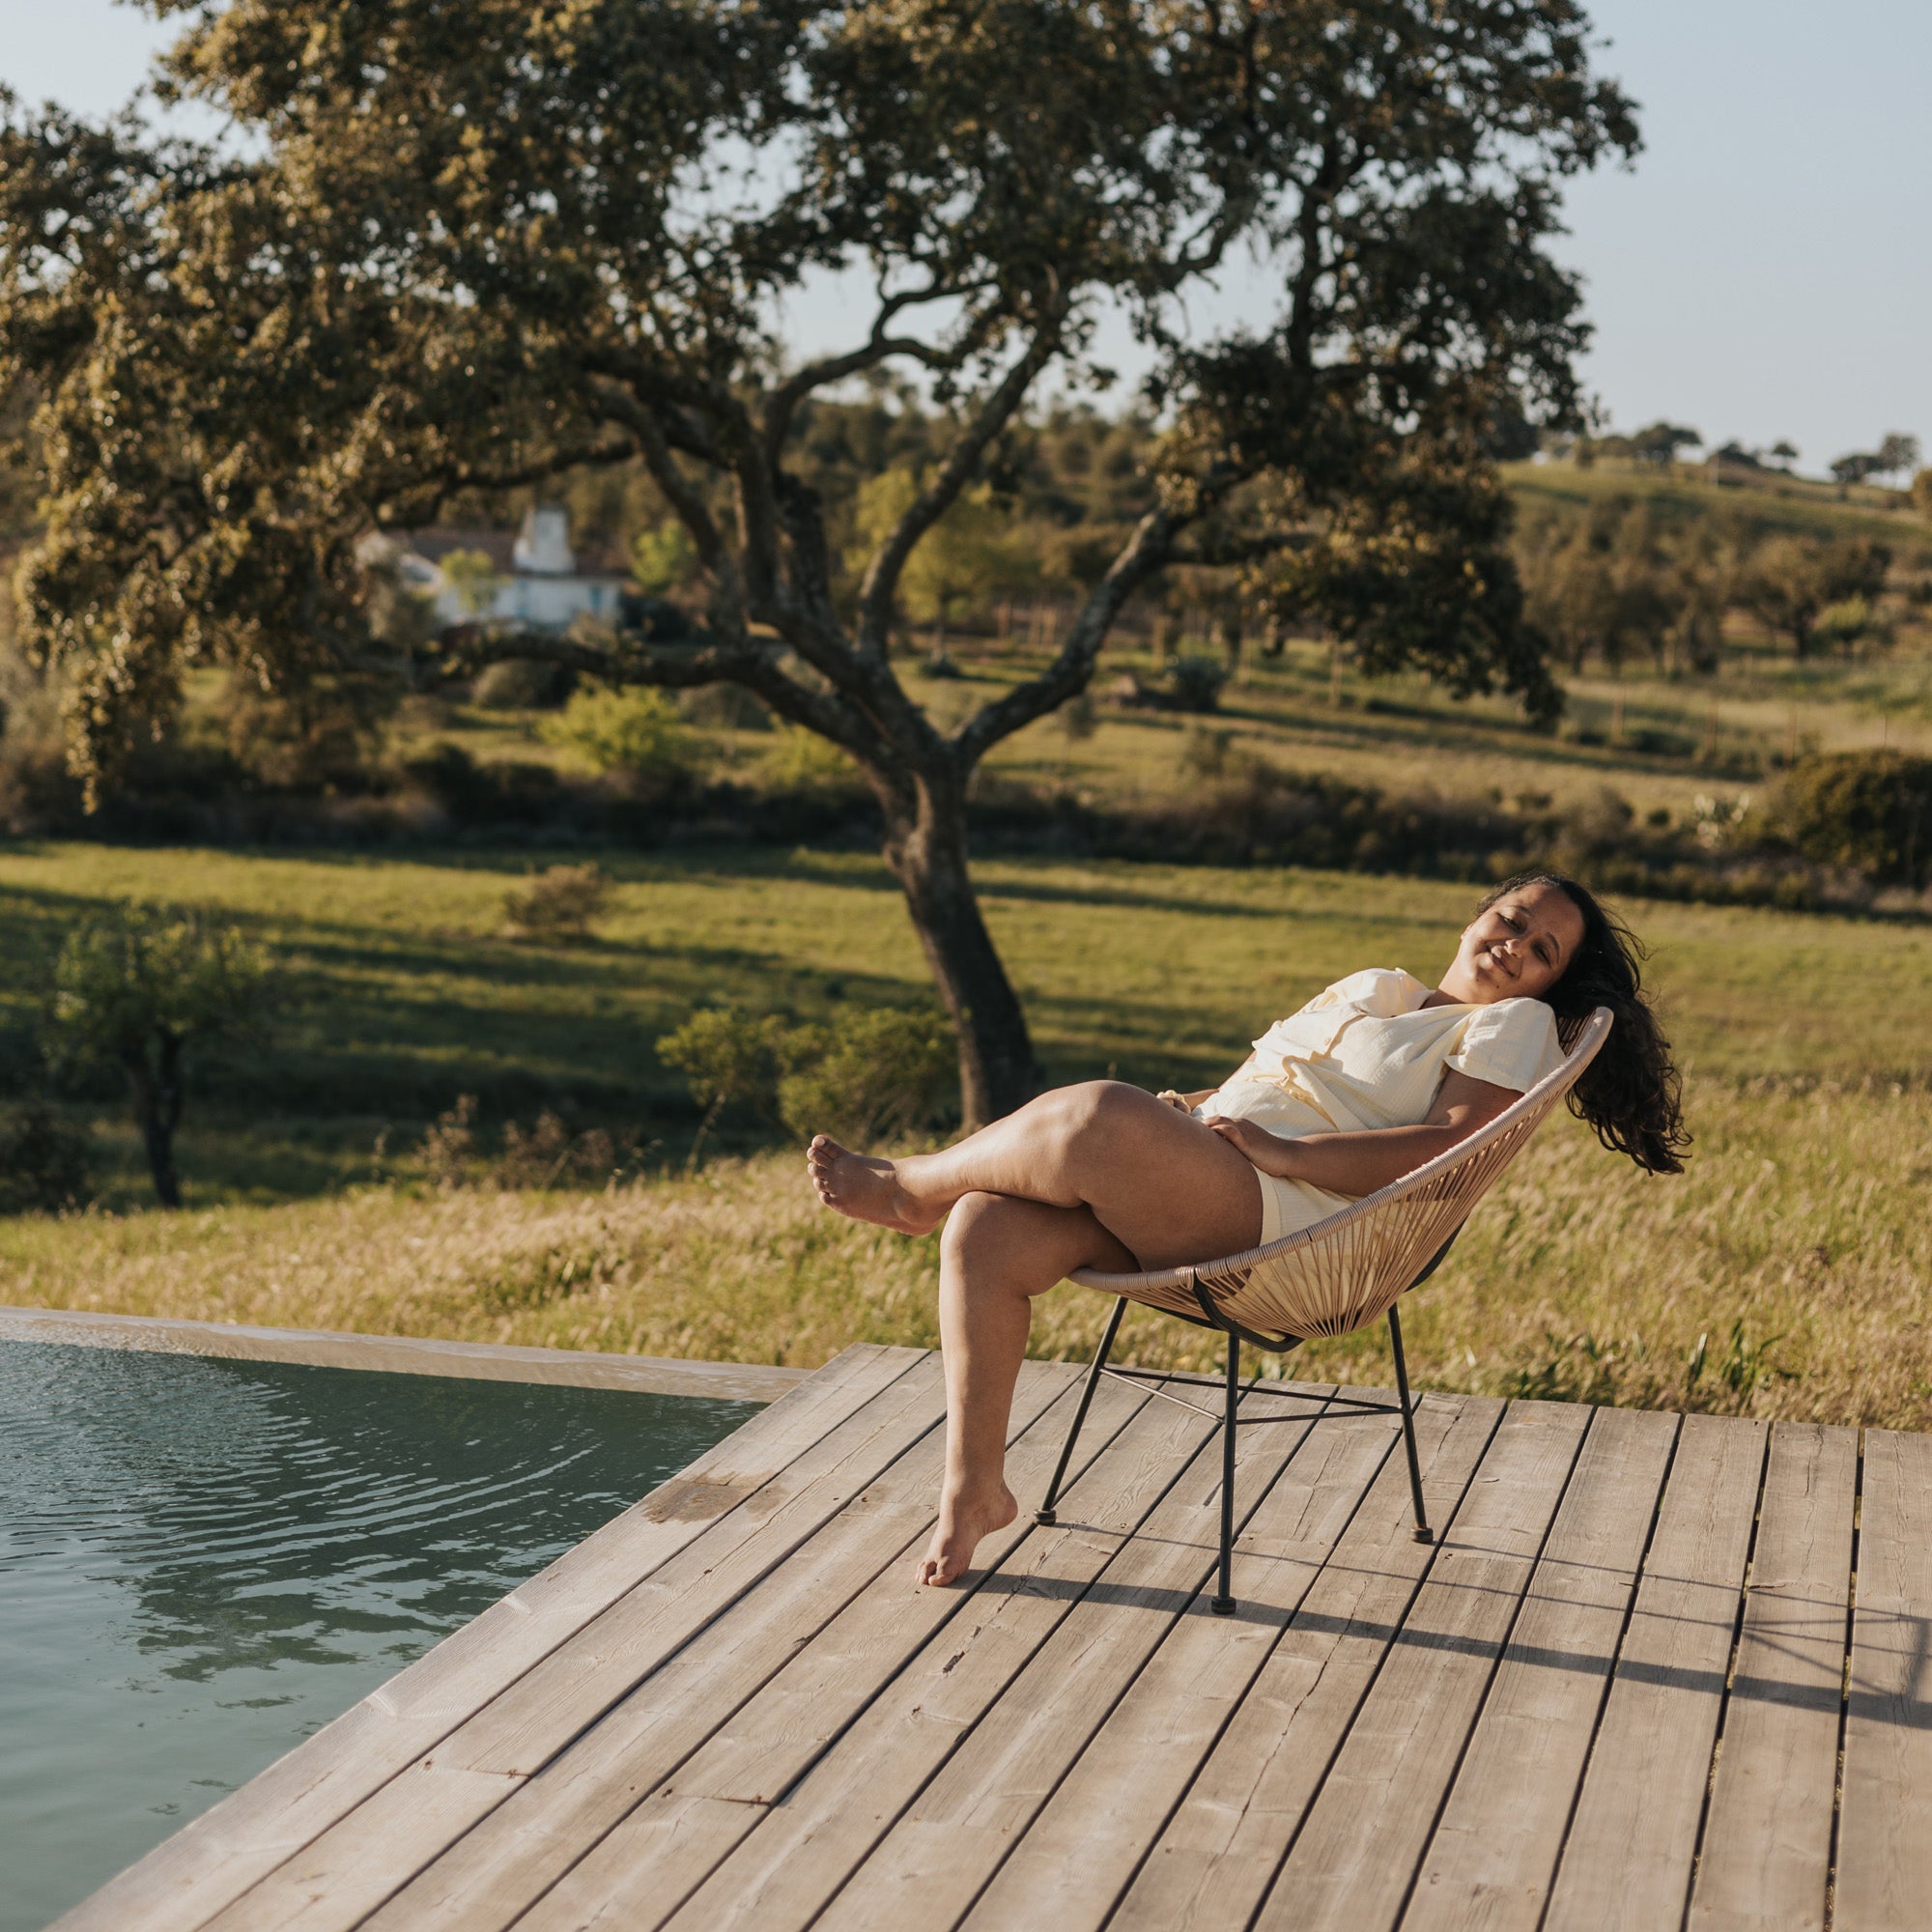 Mid-size tanned woman sitted in an outside chair taking a sun bath on the side of an ouside pool. She's wearing organic cotton made shorts and shirt.